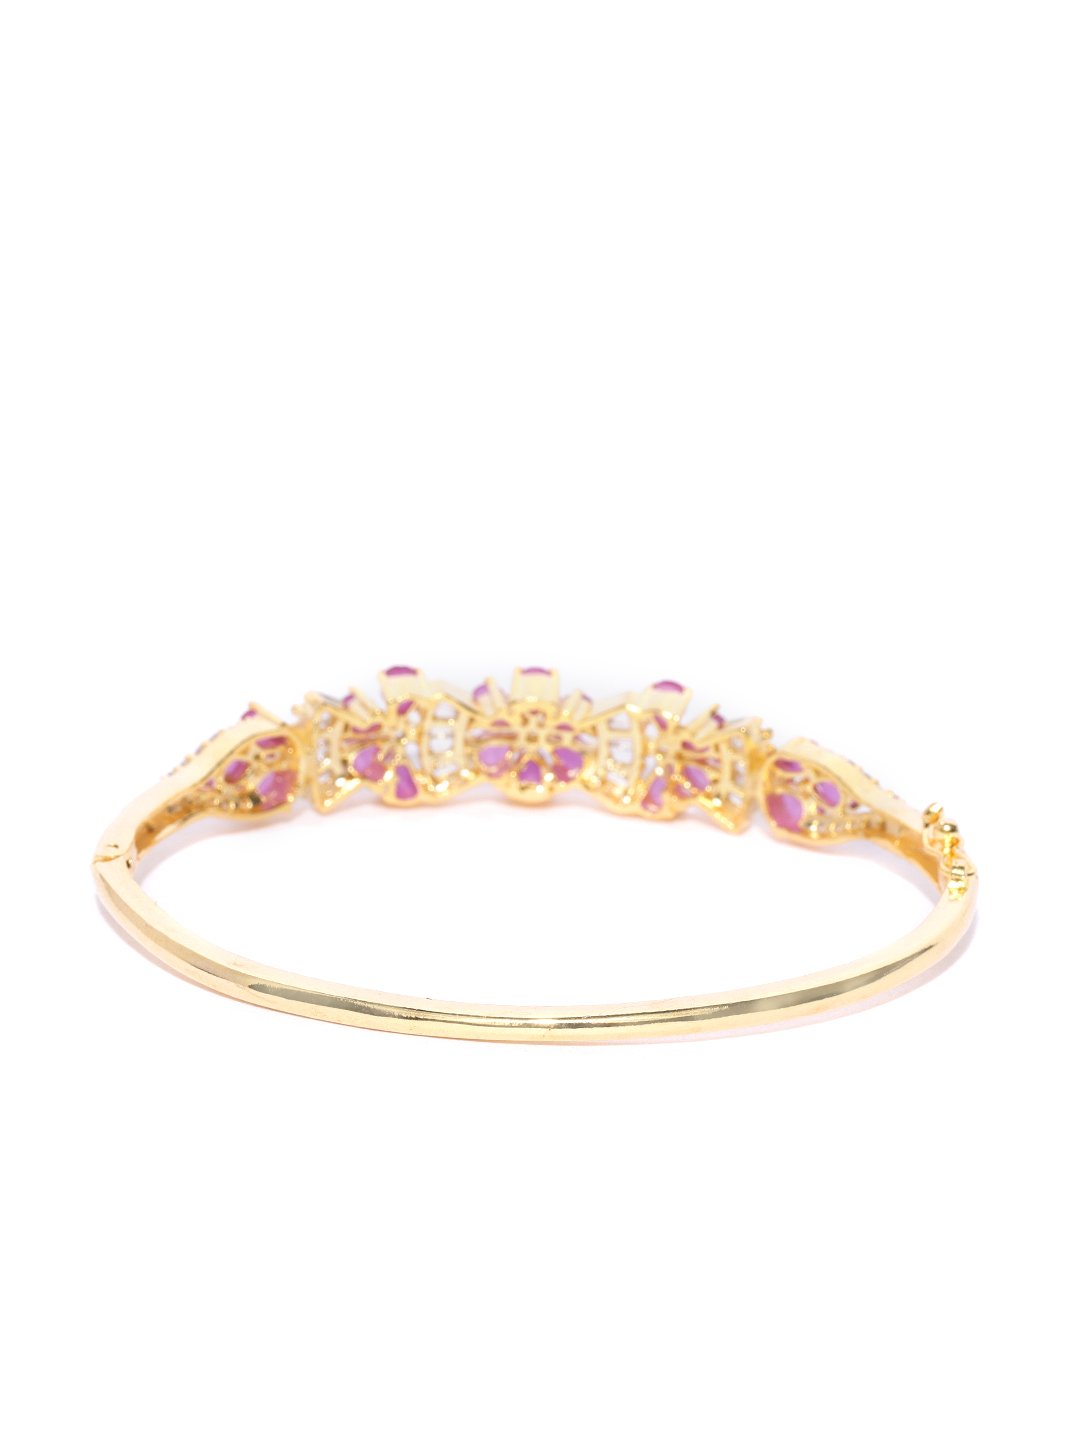 Women's  American Diamond and Ruby Stones Studded Floral Patterned Bracelet in Magenta Color - Priyaasi